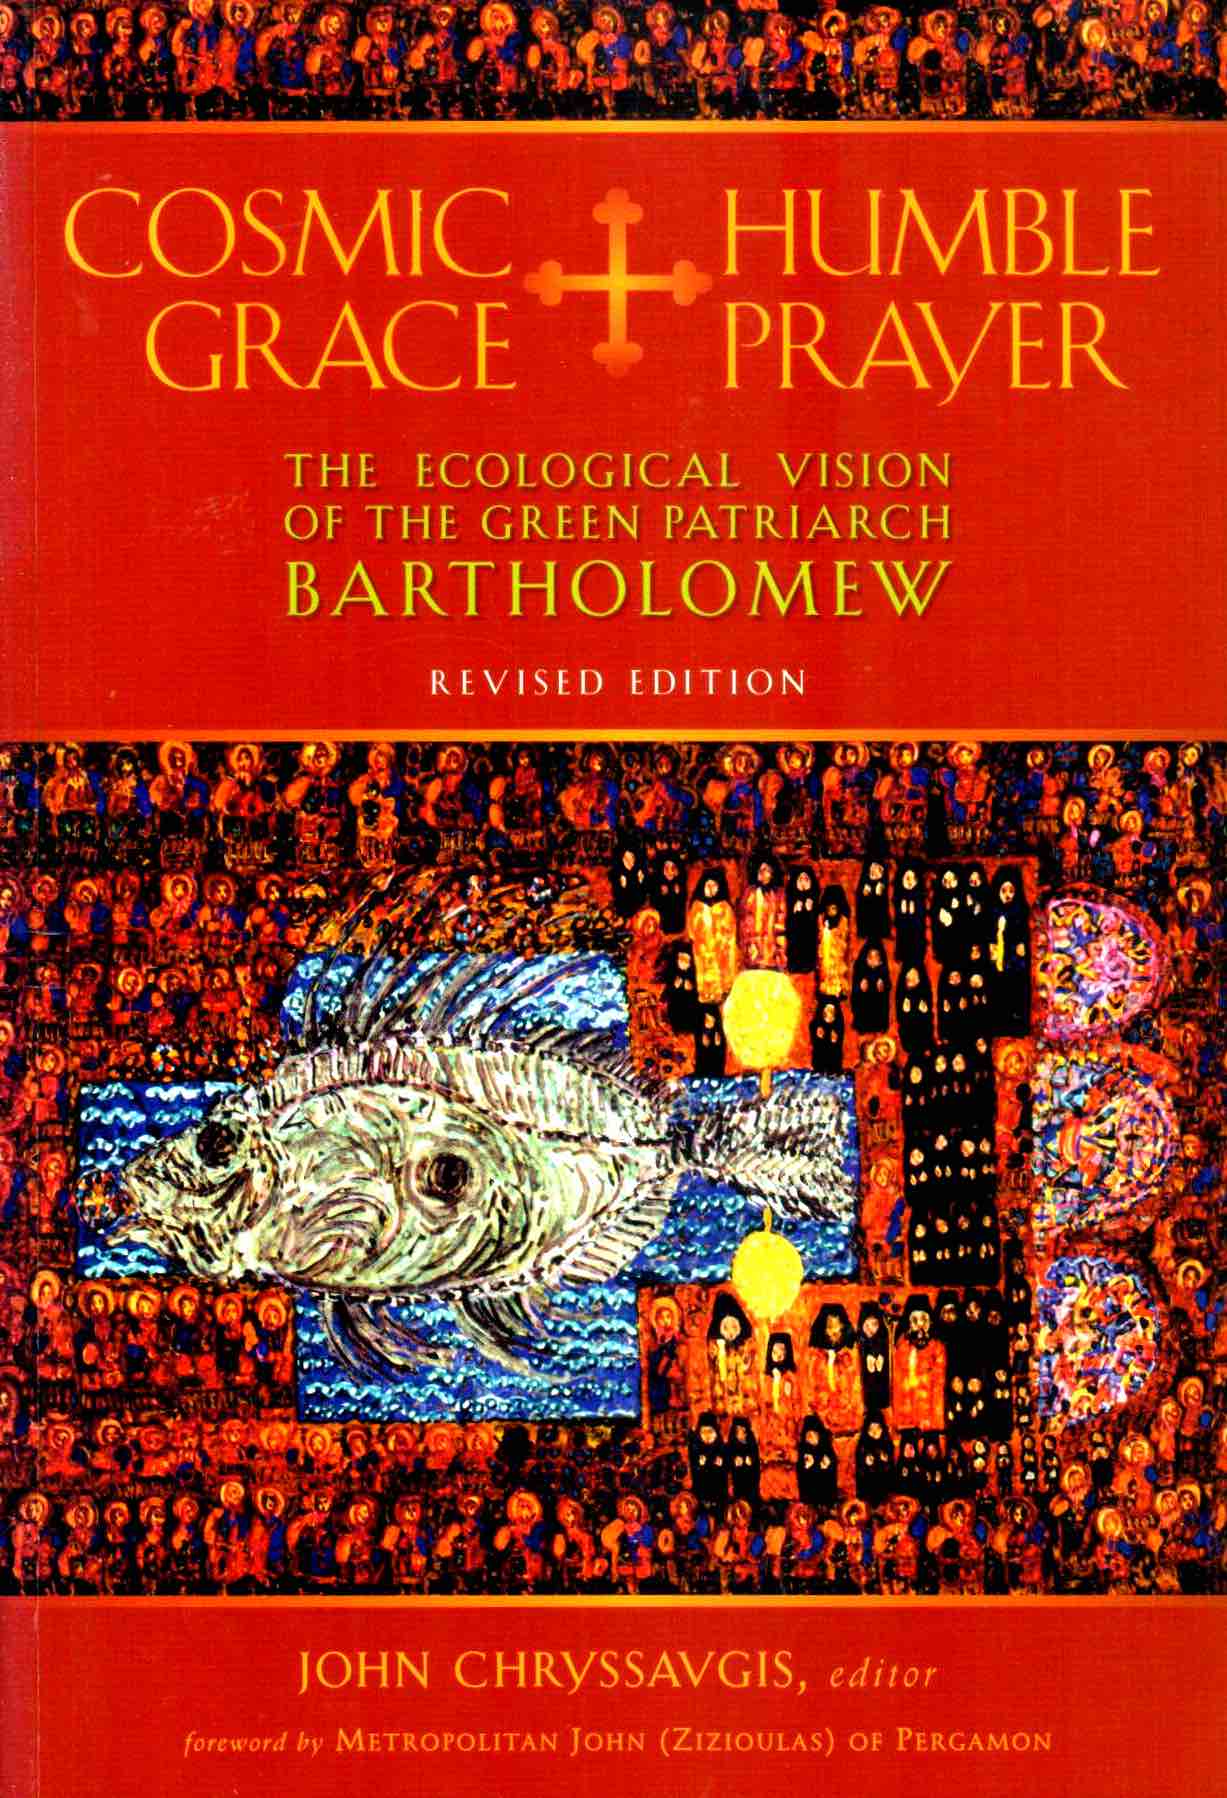 Cover of Cosmic Grace Humble Prayer